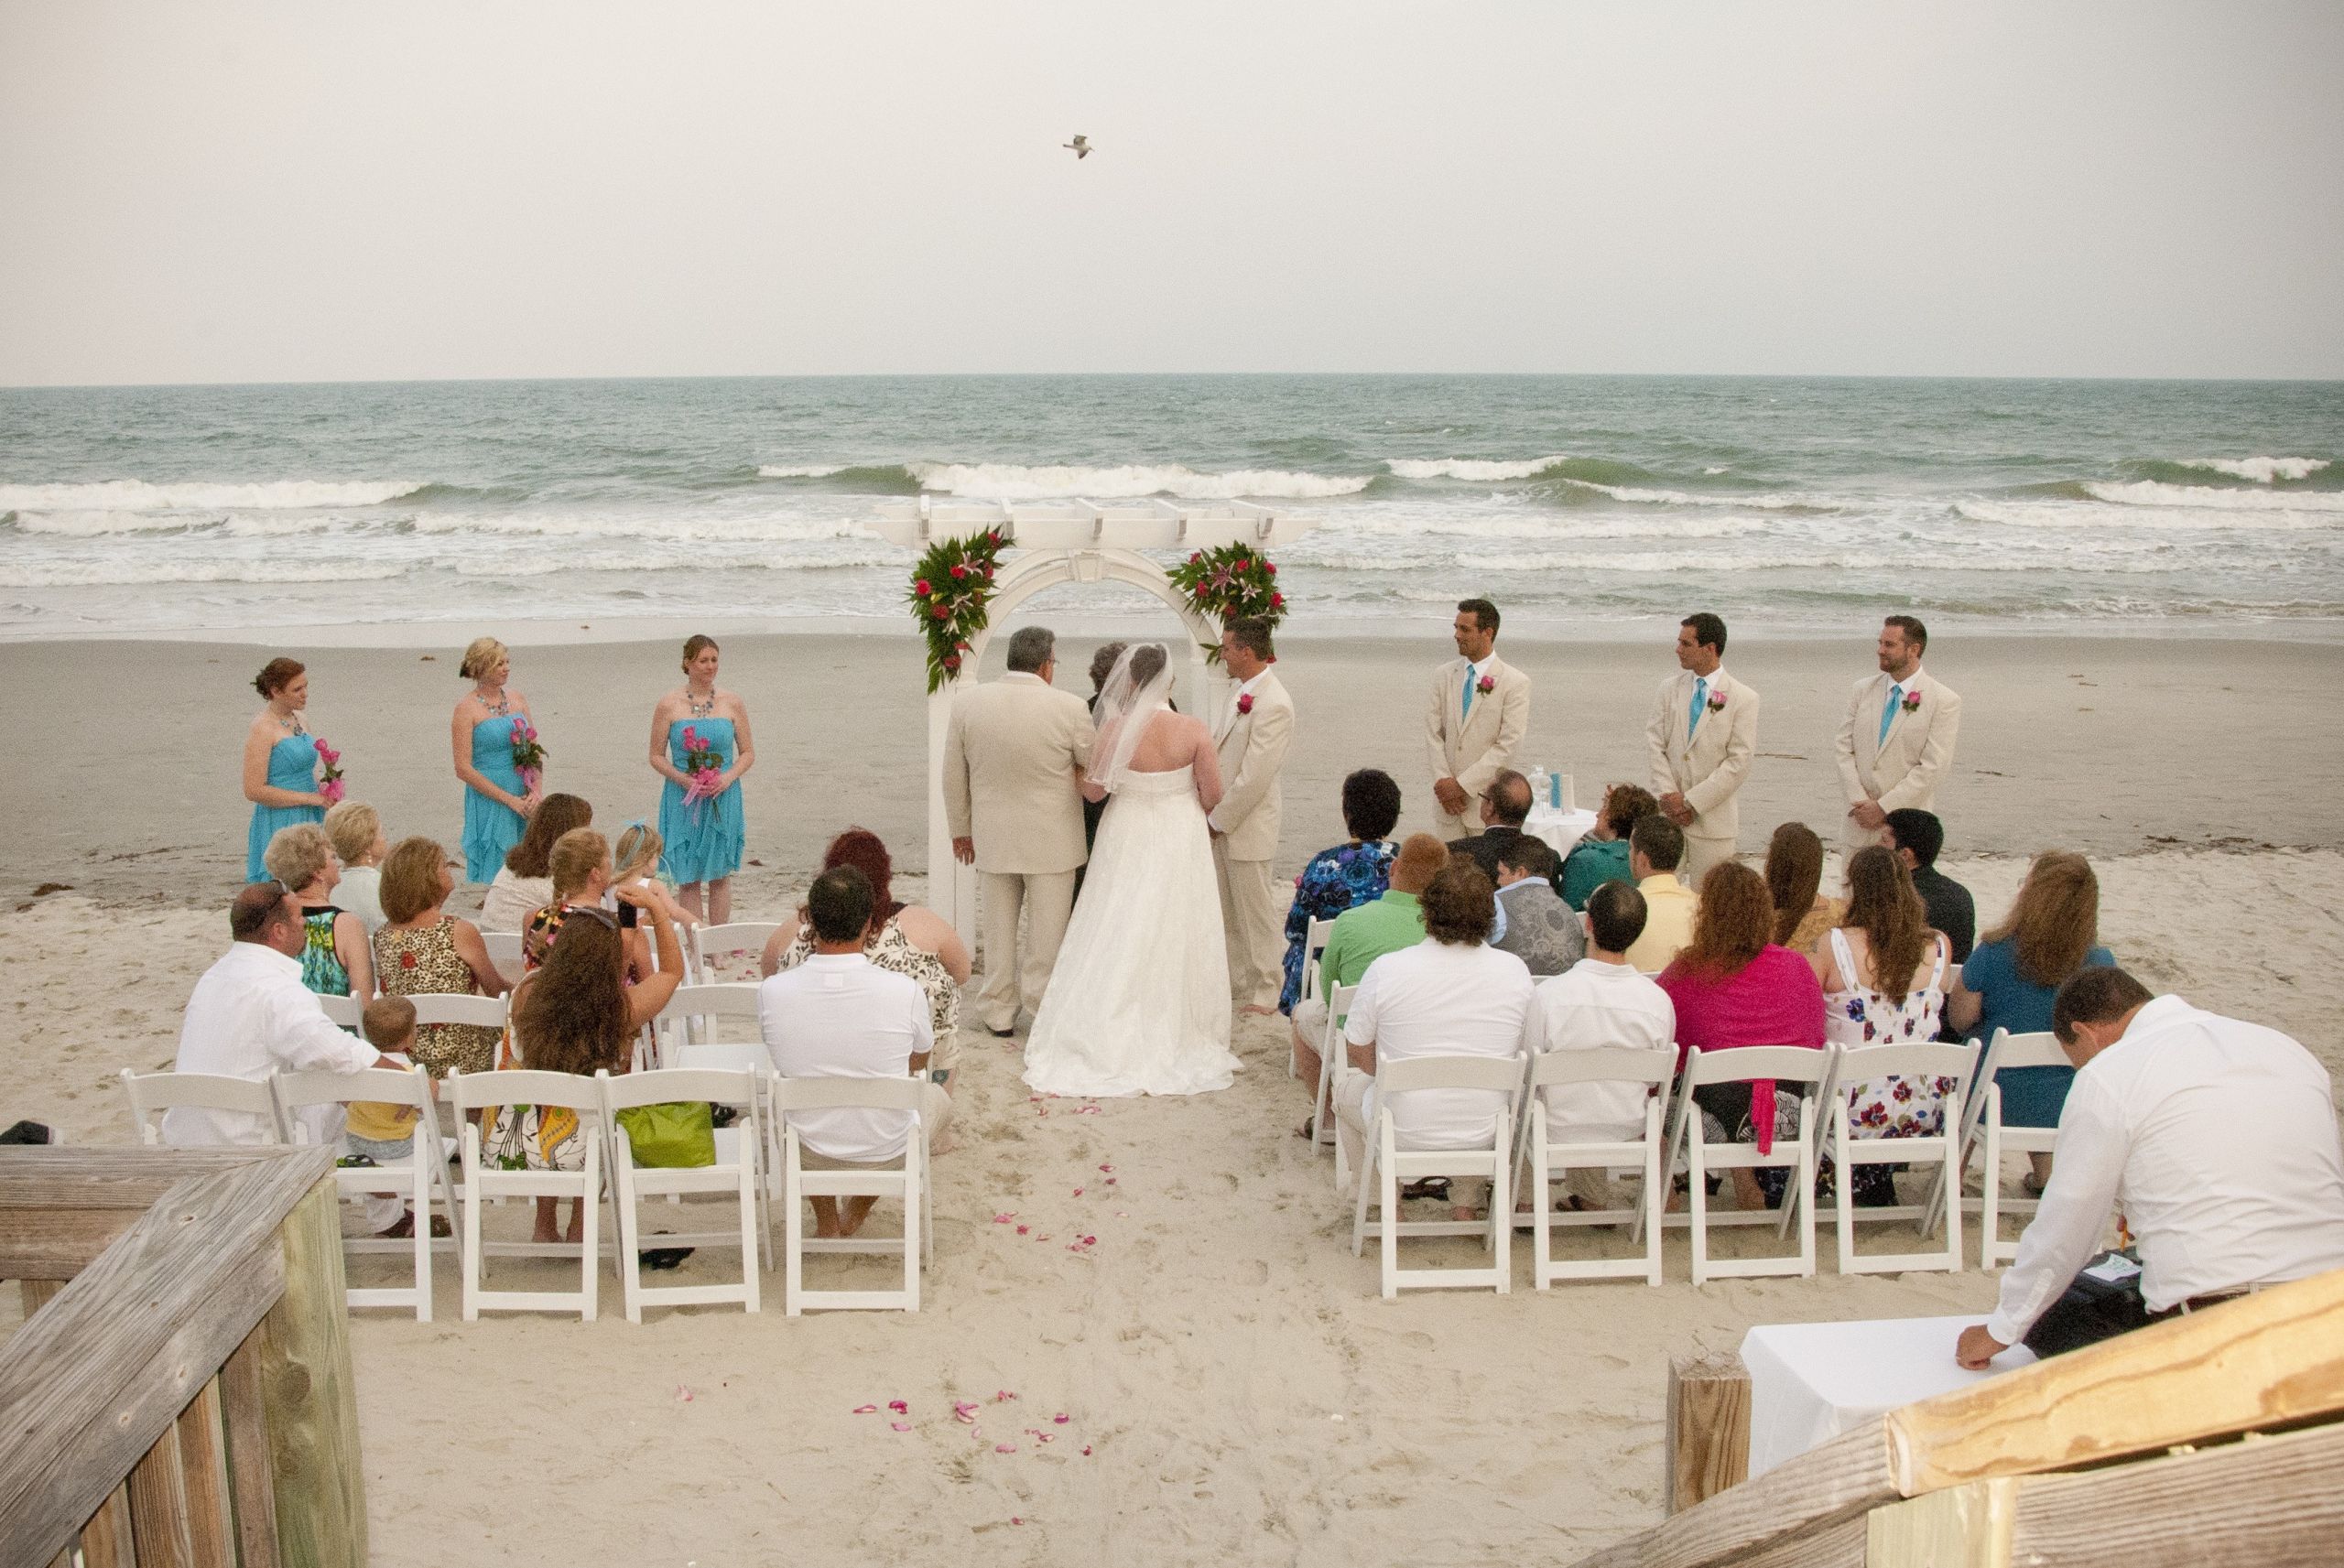 Weddings At Myrtle Beach
 FAQ Can You Get Married The Beach